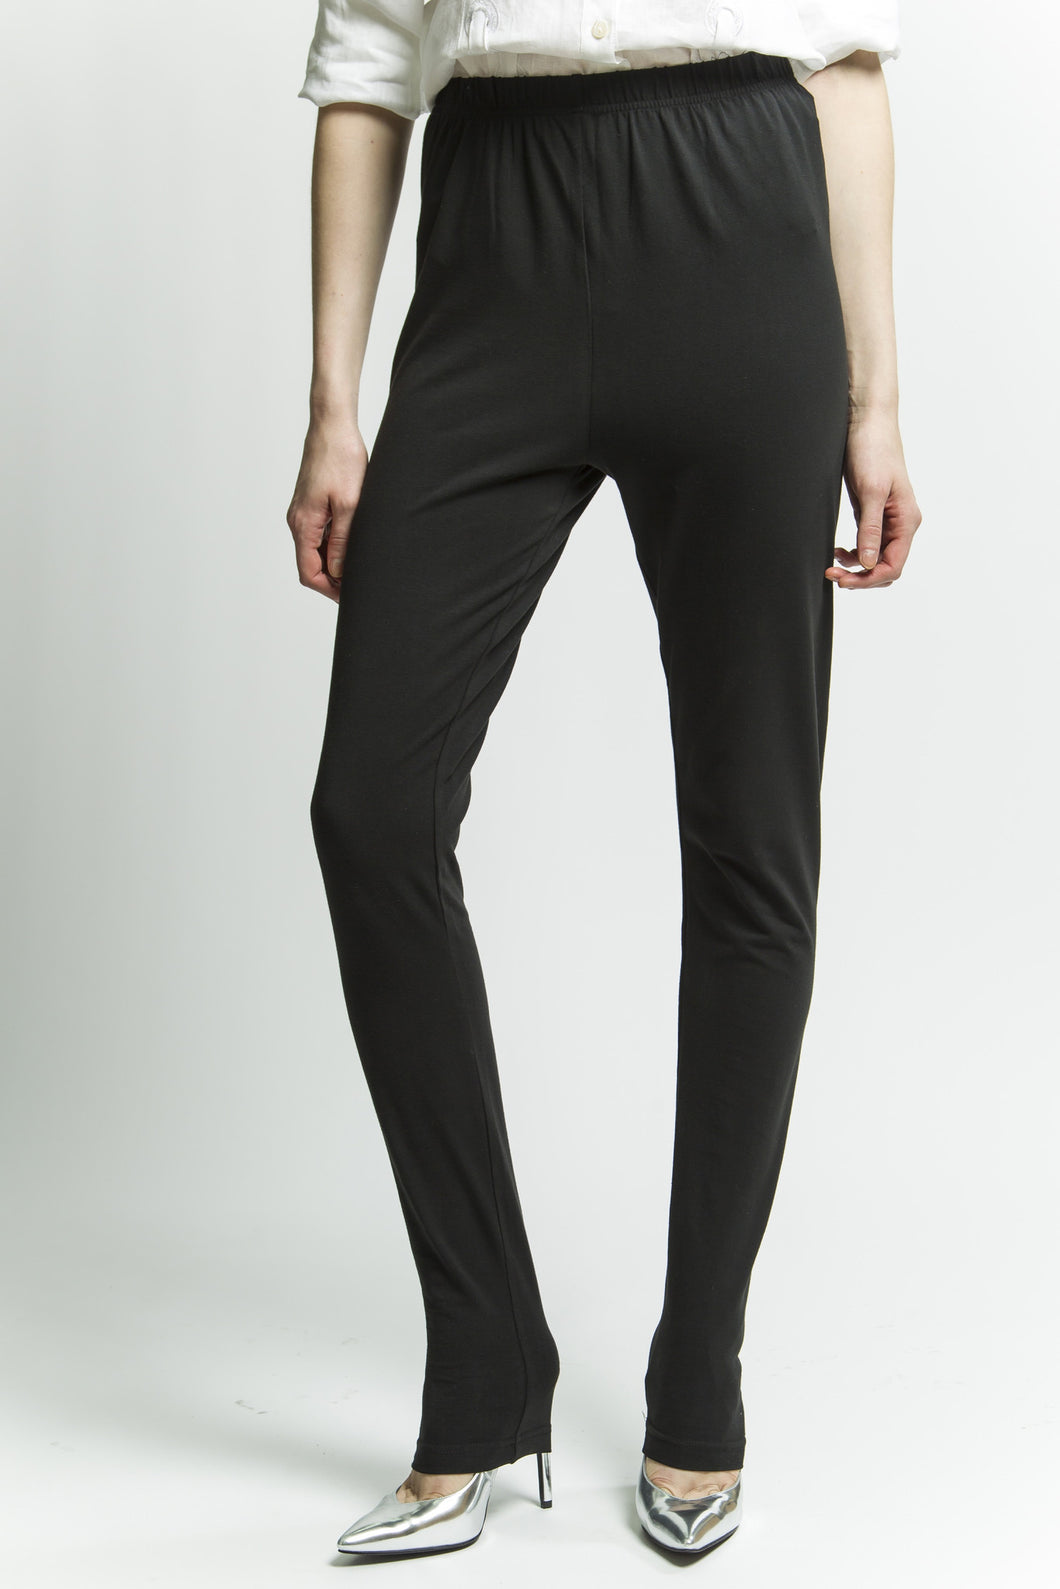 Made in NYC High Waisted Leggings (Black) Style 1120